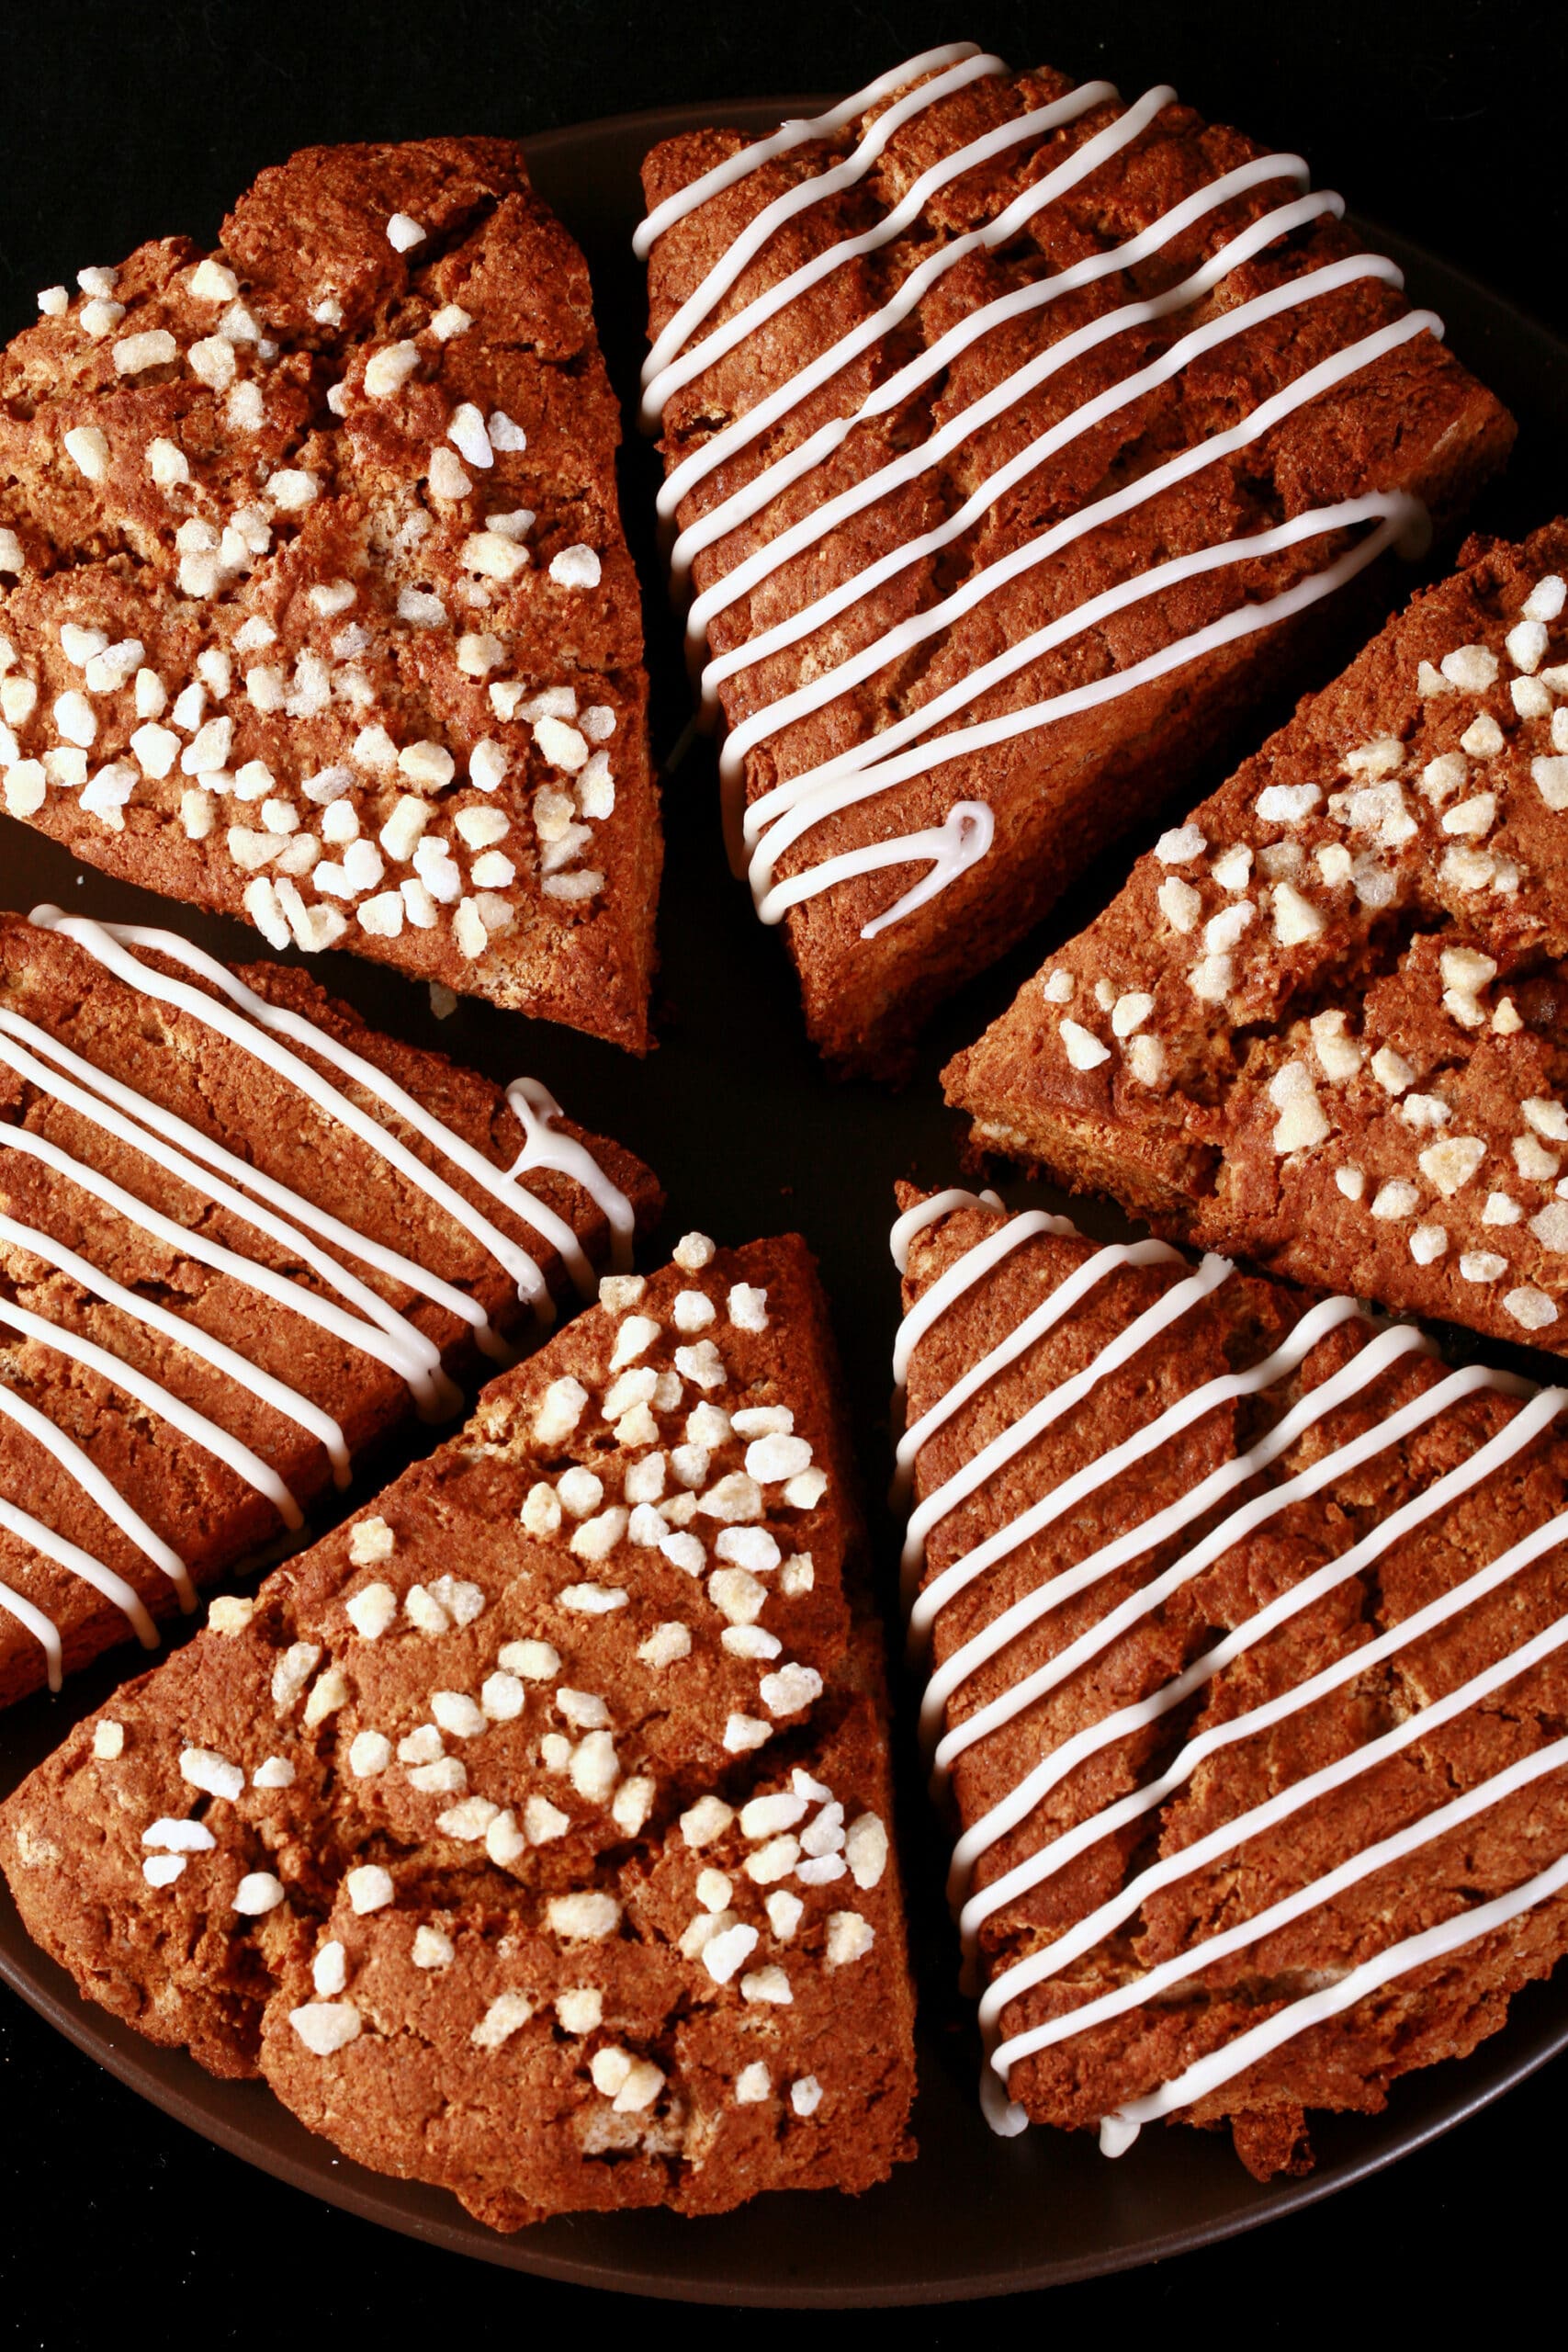 A plate of gluten-free gingerbread scones. Half have a sugar crust, the other half have a vanilla glaze drizzled over them.